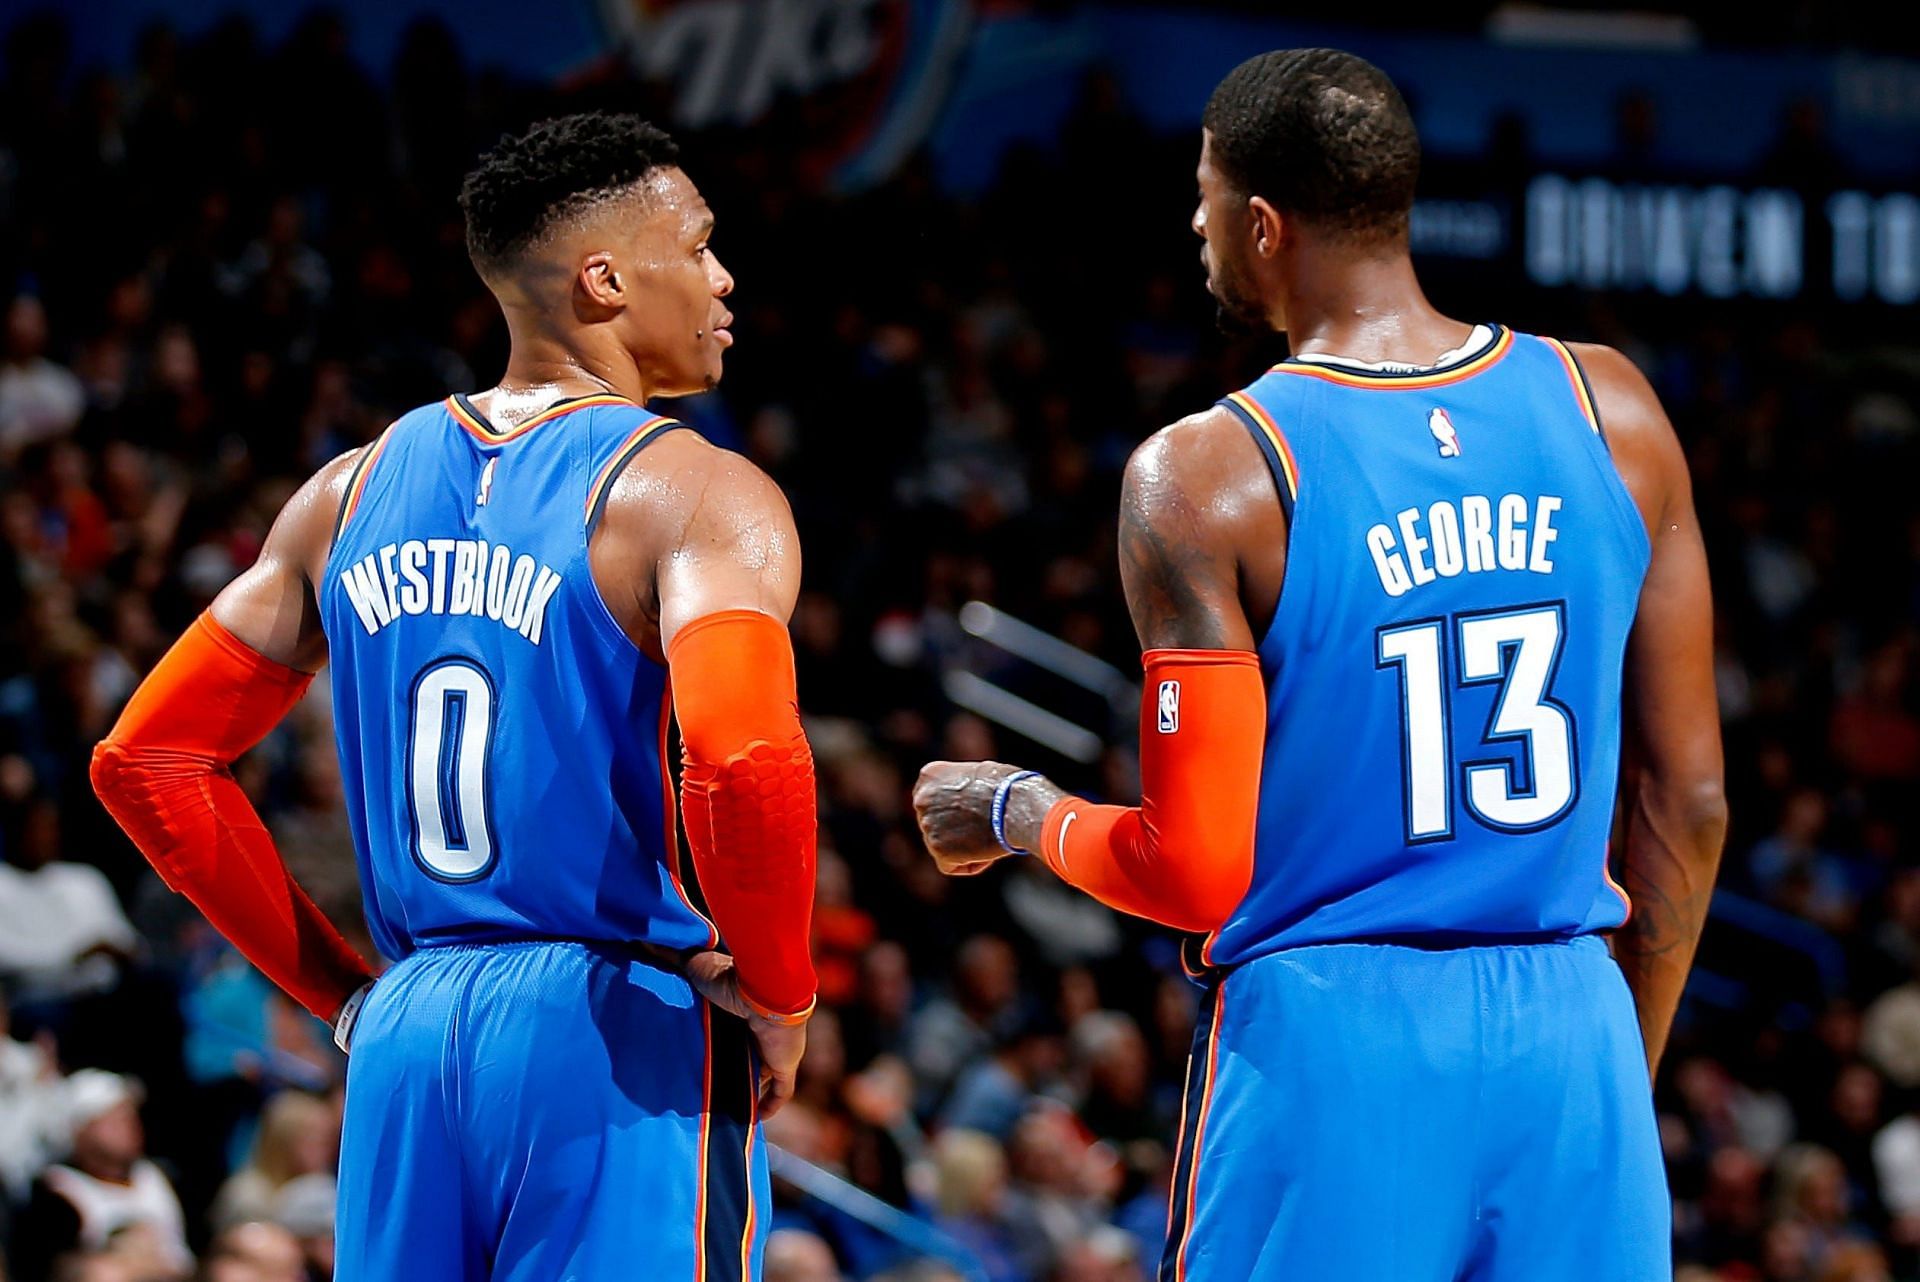 Russell Westbrook and Paul George are back together as teammates